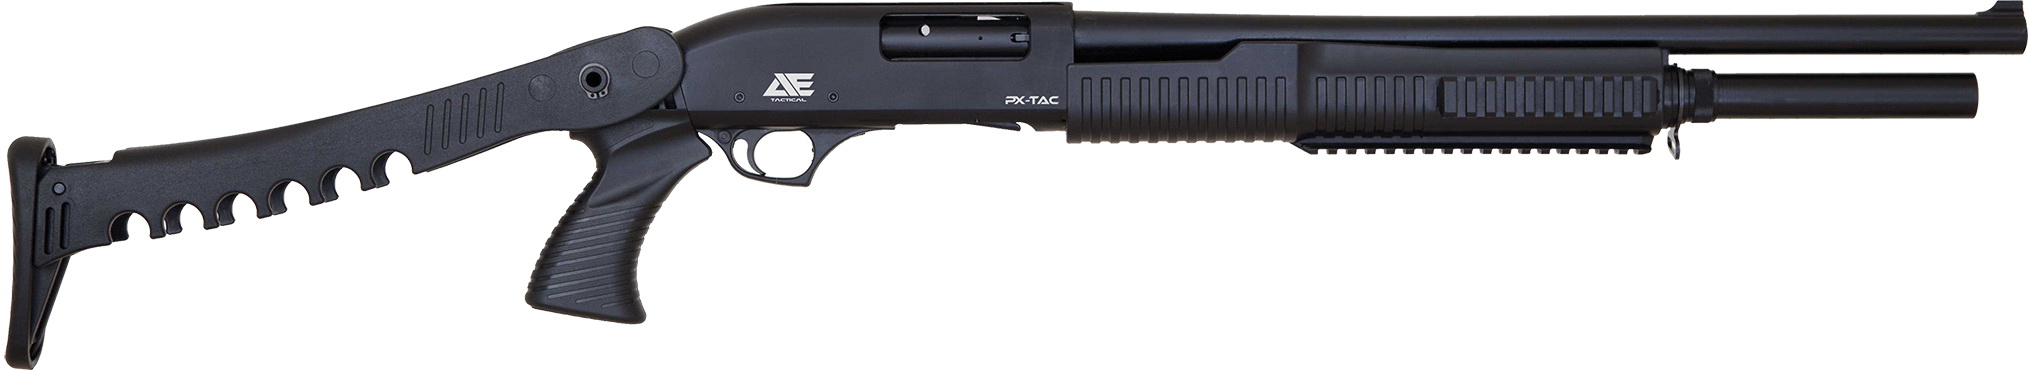 AE TACTICAL PX TAC 105